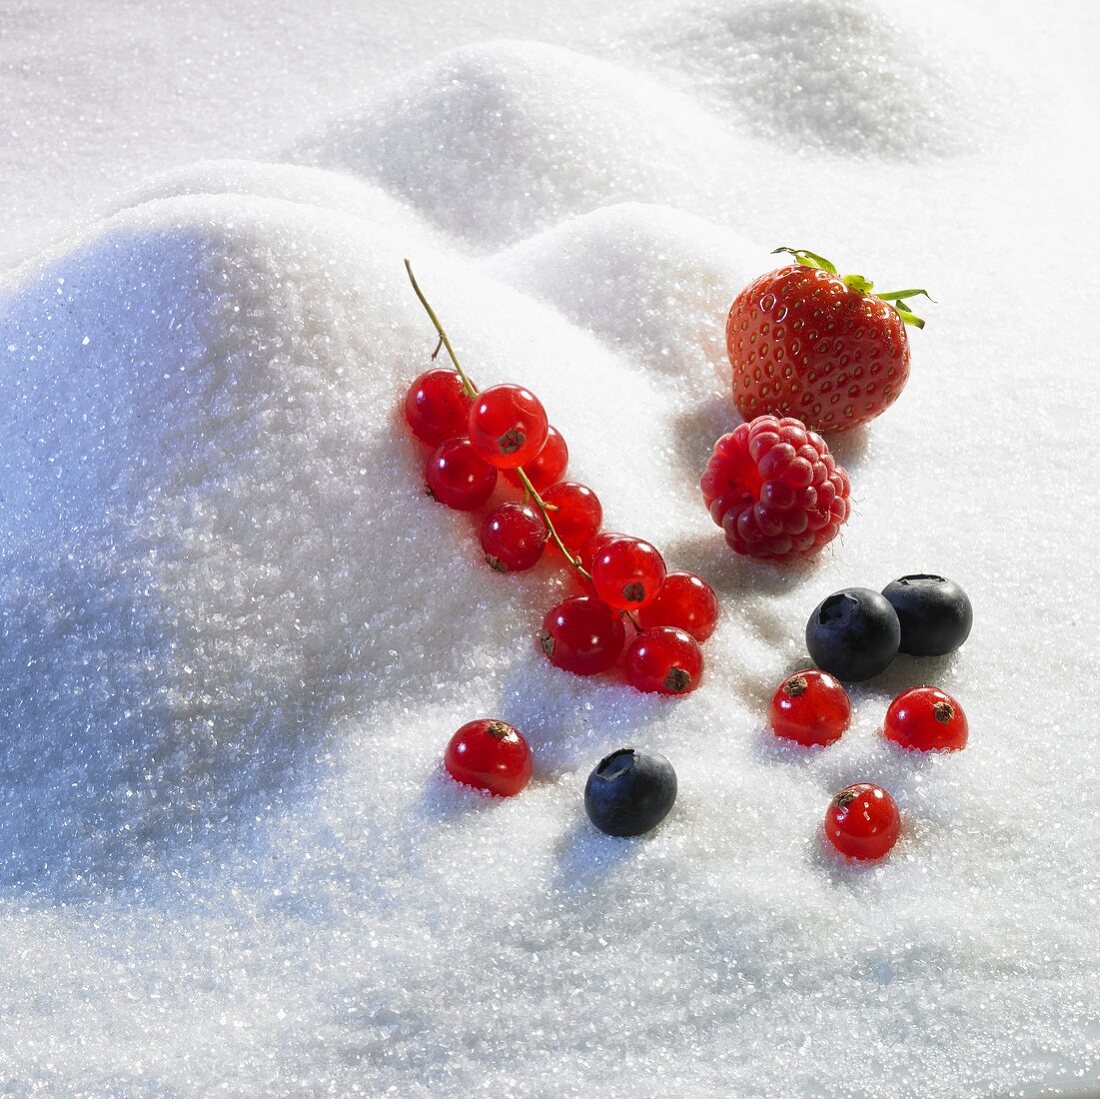 Sugar landscape with assorted berries